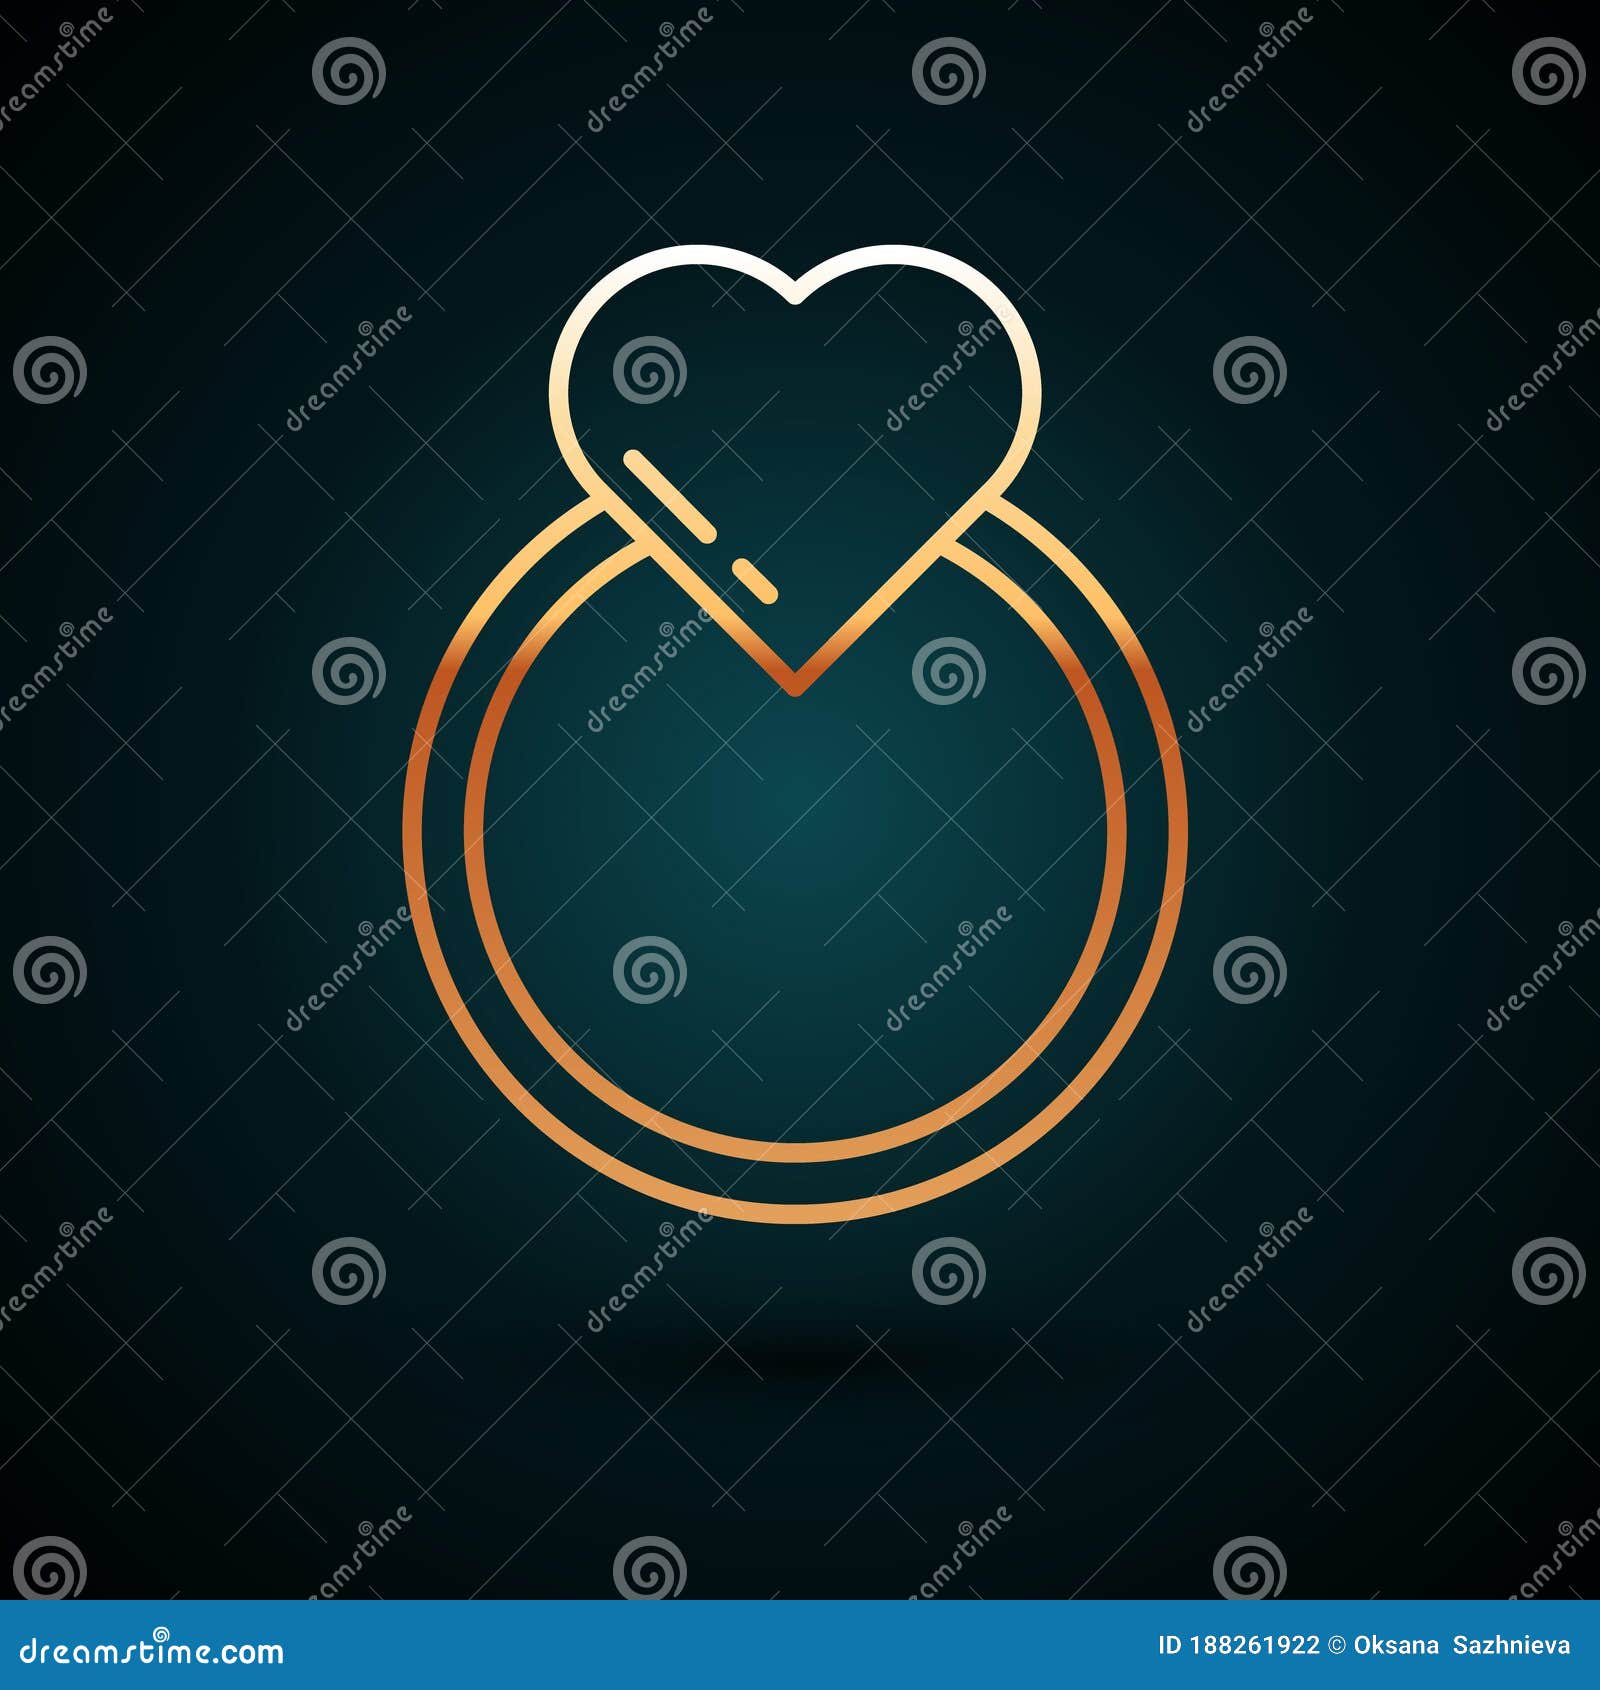 Gold Line Wedding Rings Icon Isolated On Dark Blue